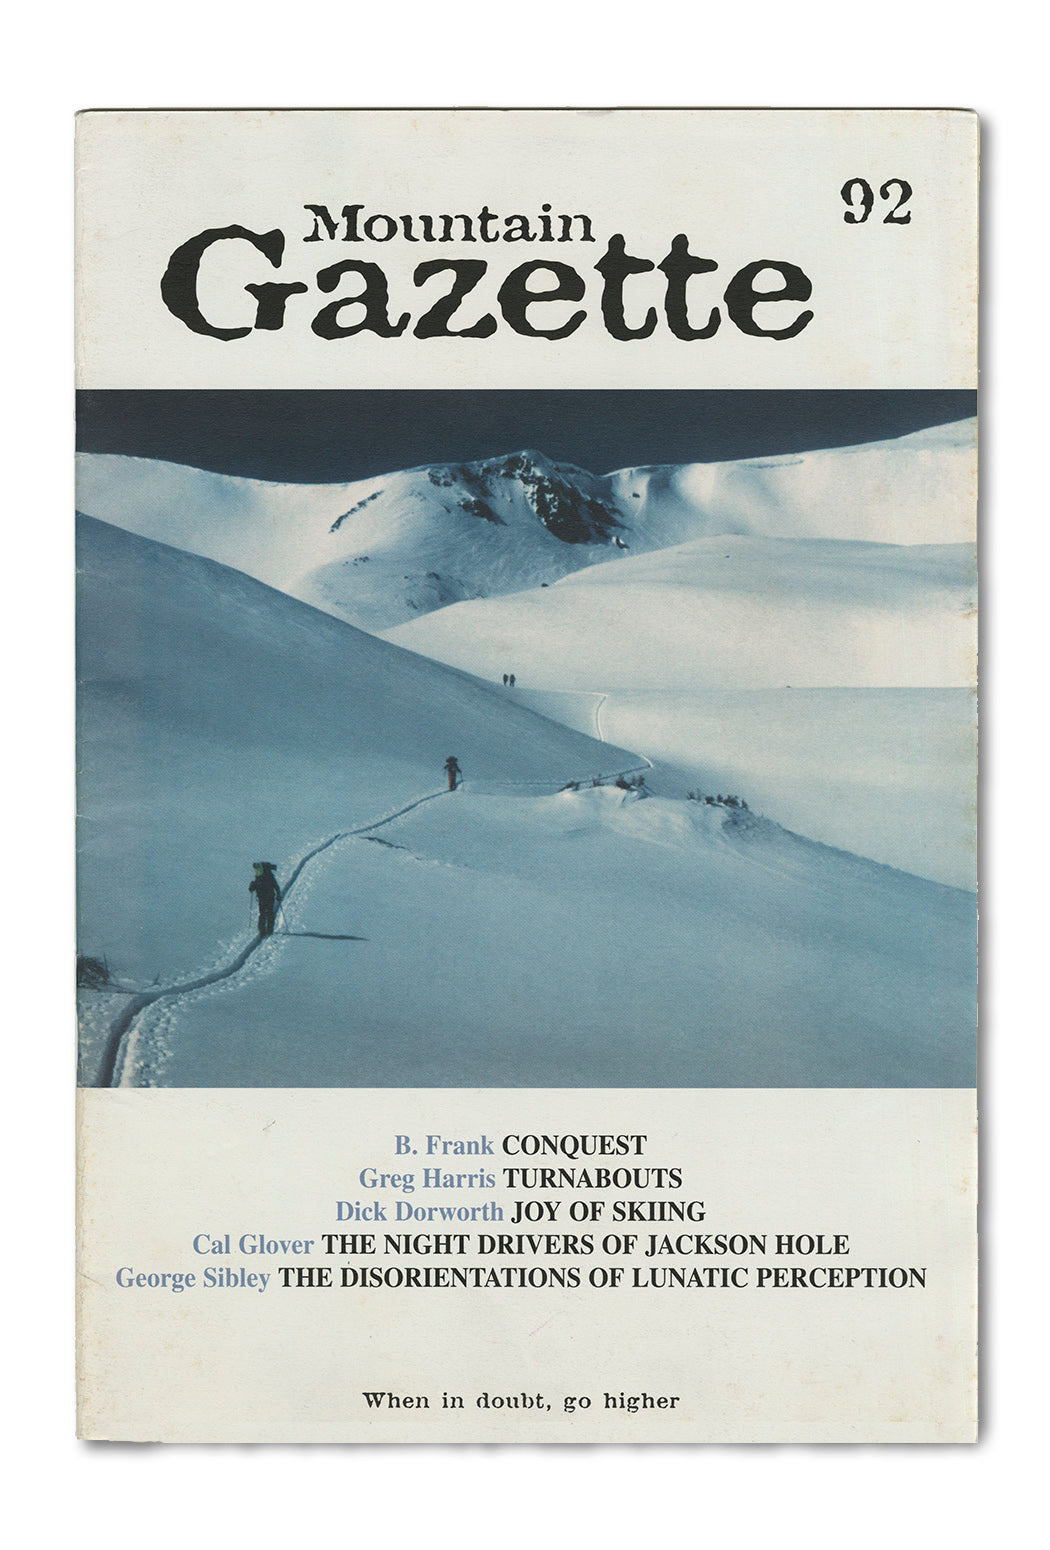 Vintage cover art of Mountain Gazette issue 92 showing mountaineers trekking on the snow